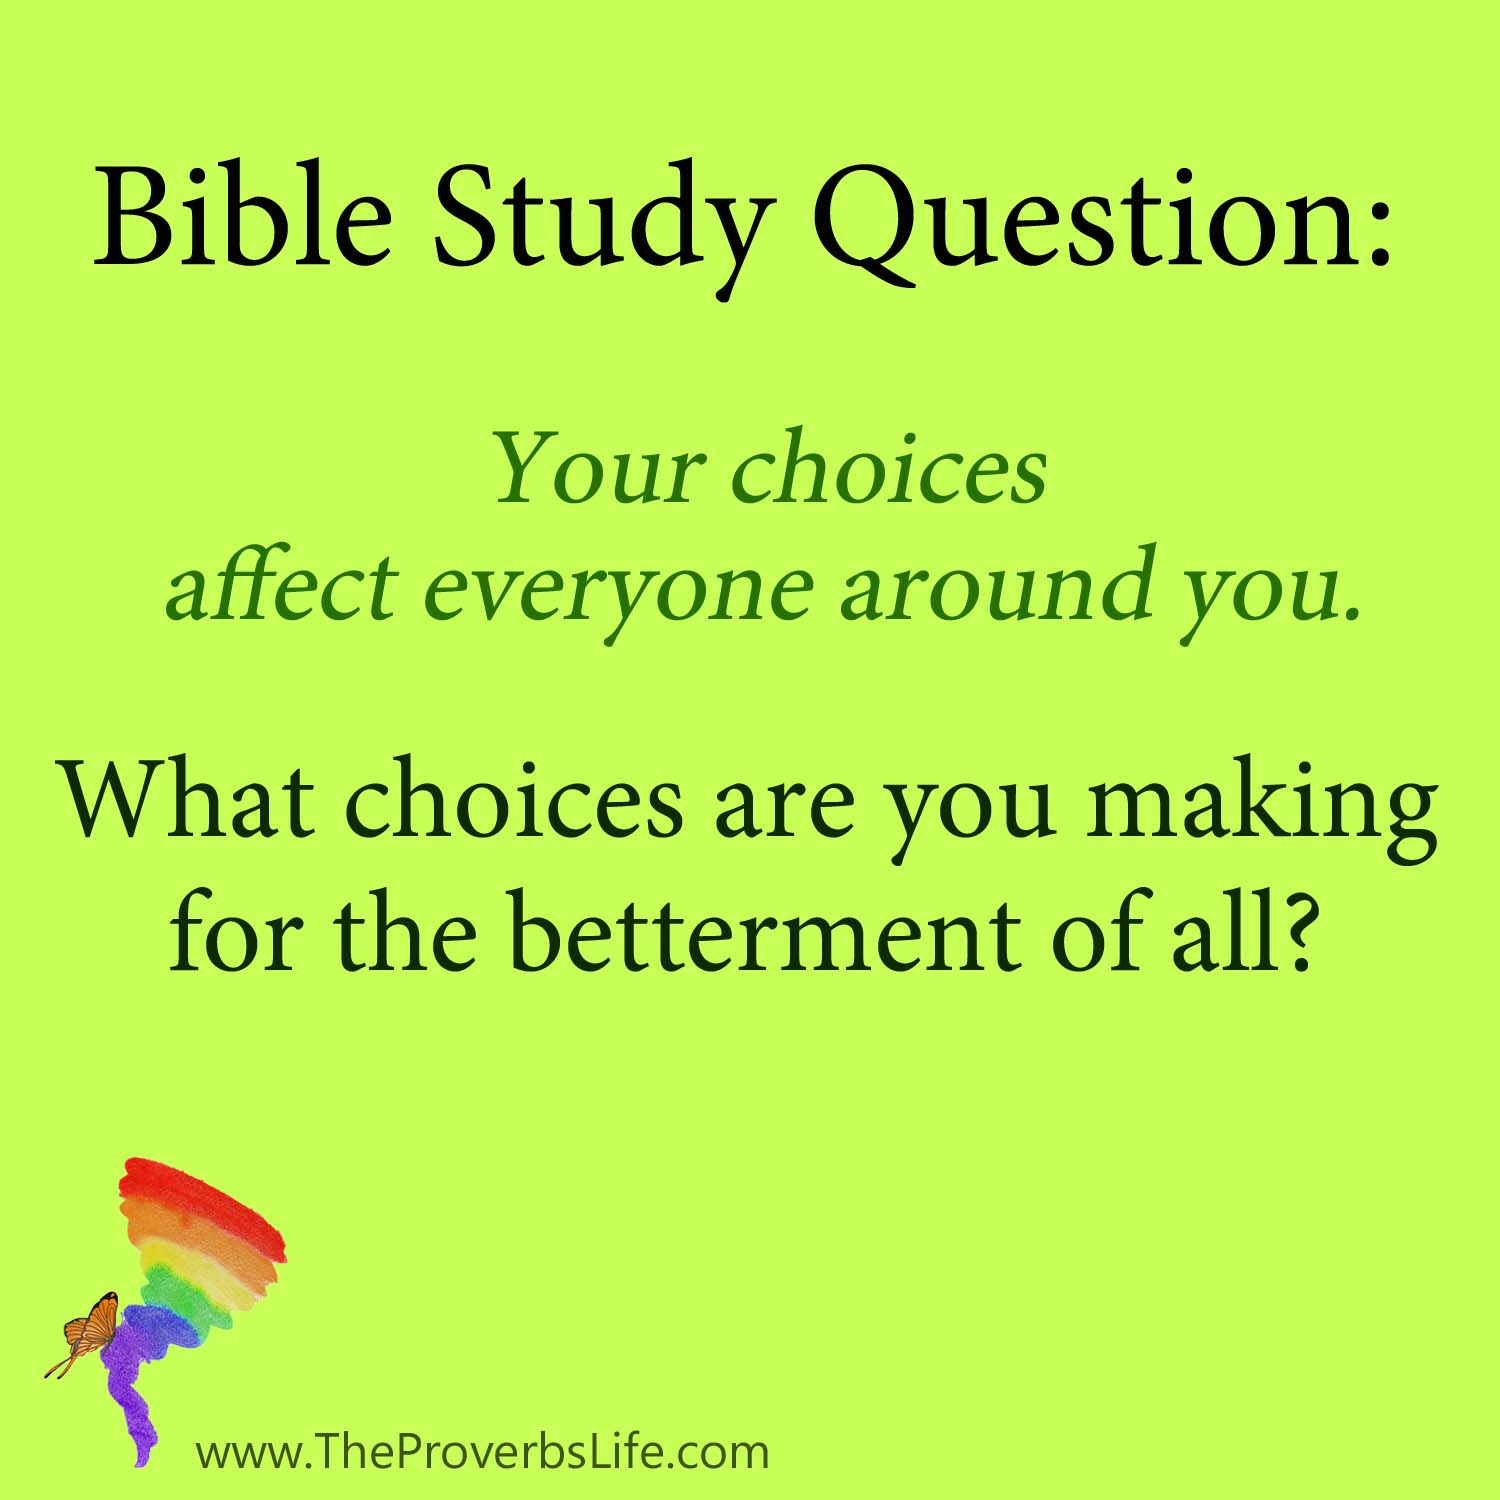 Bible Study Questions - choices affect everyone